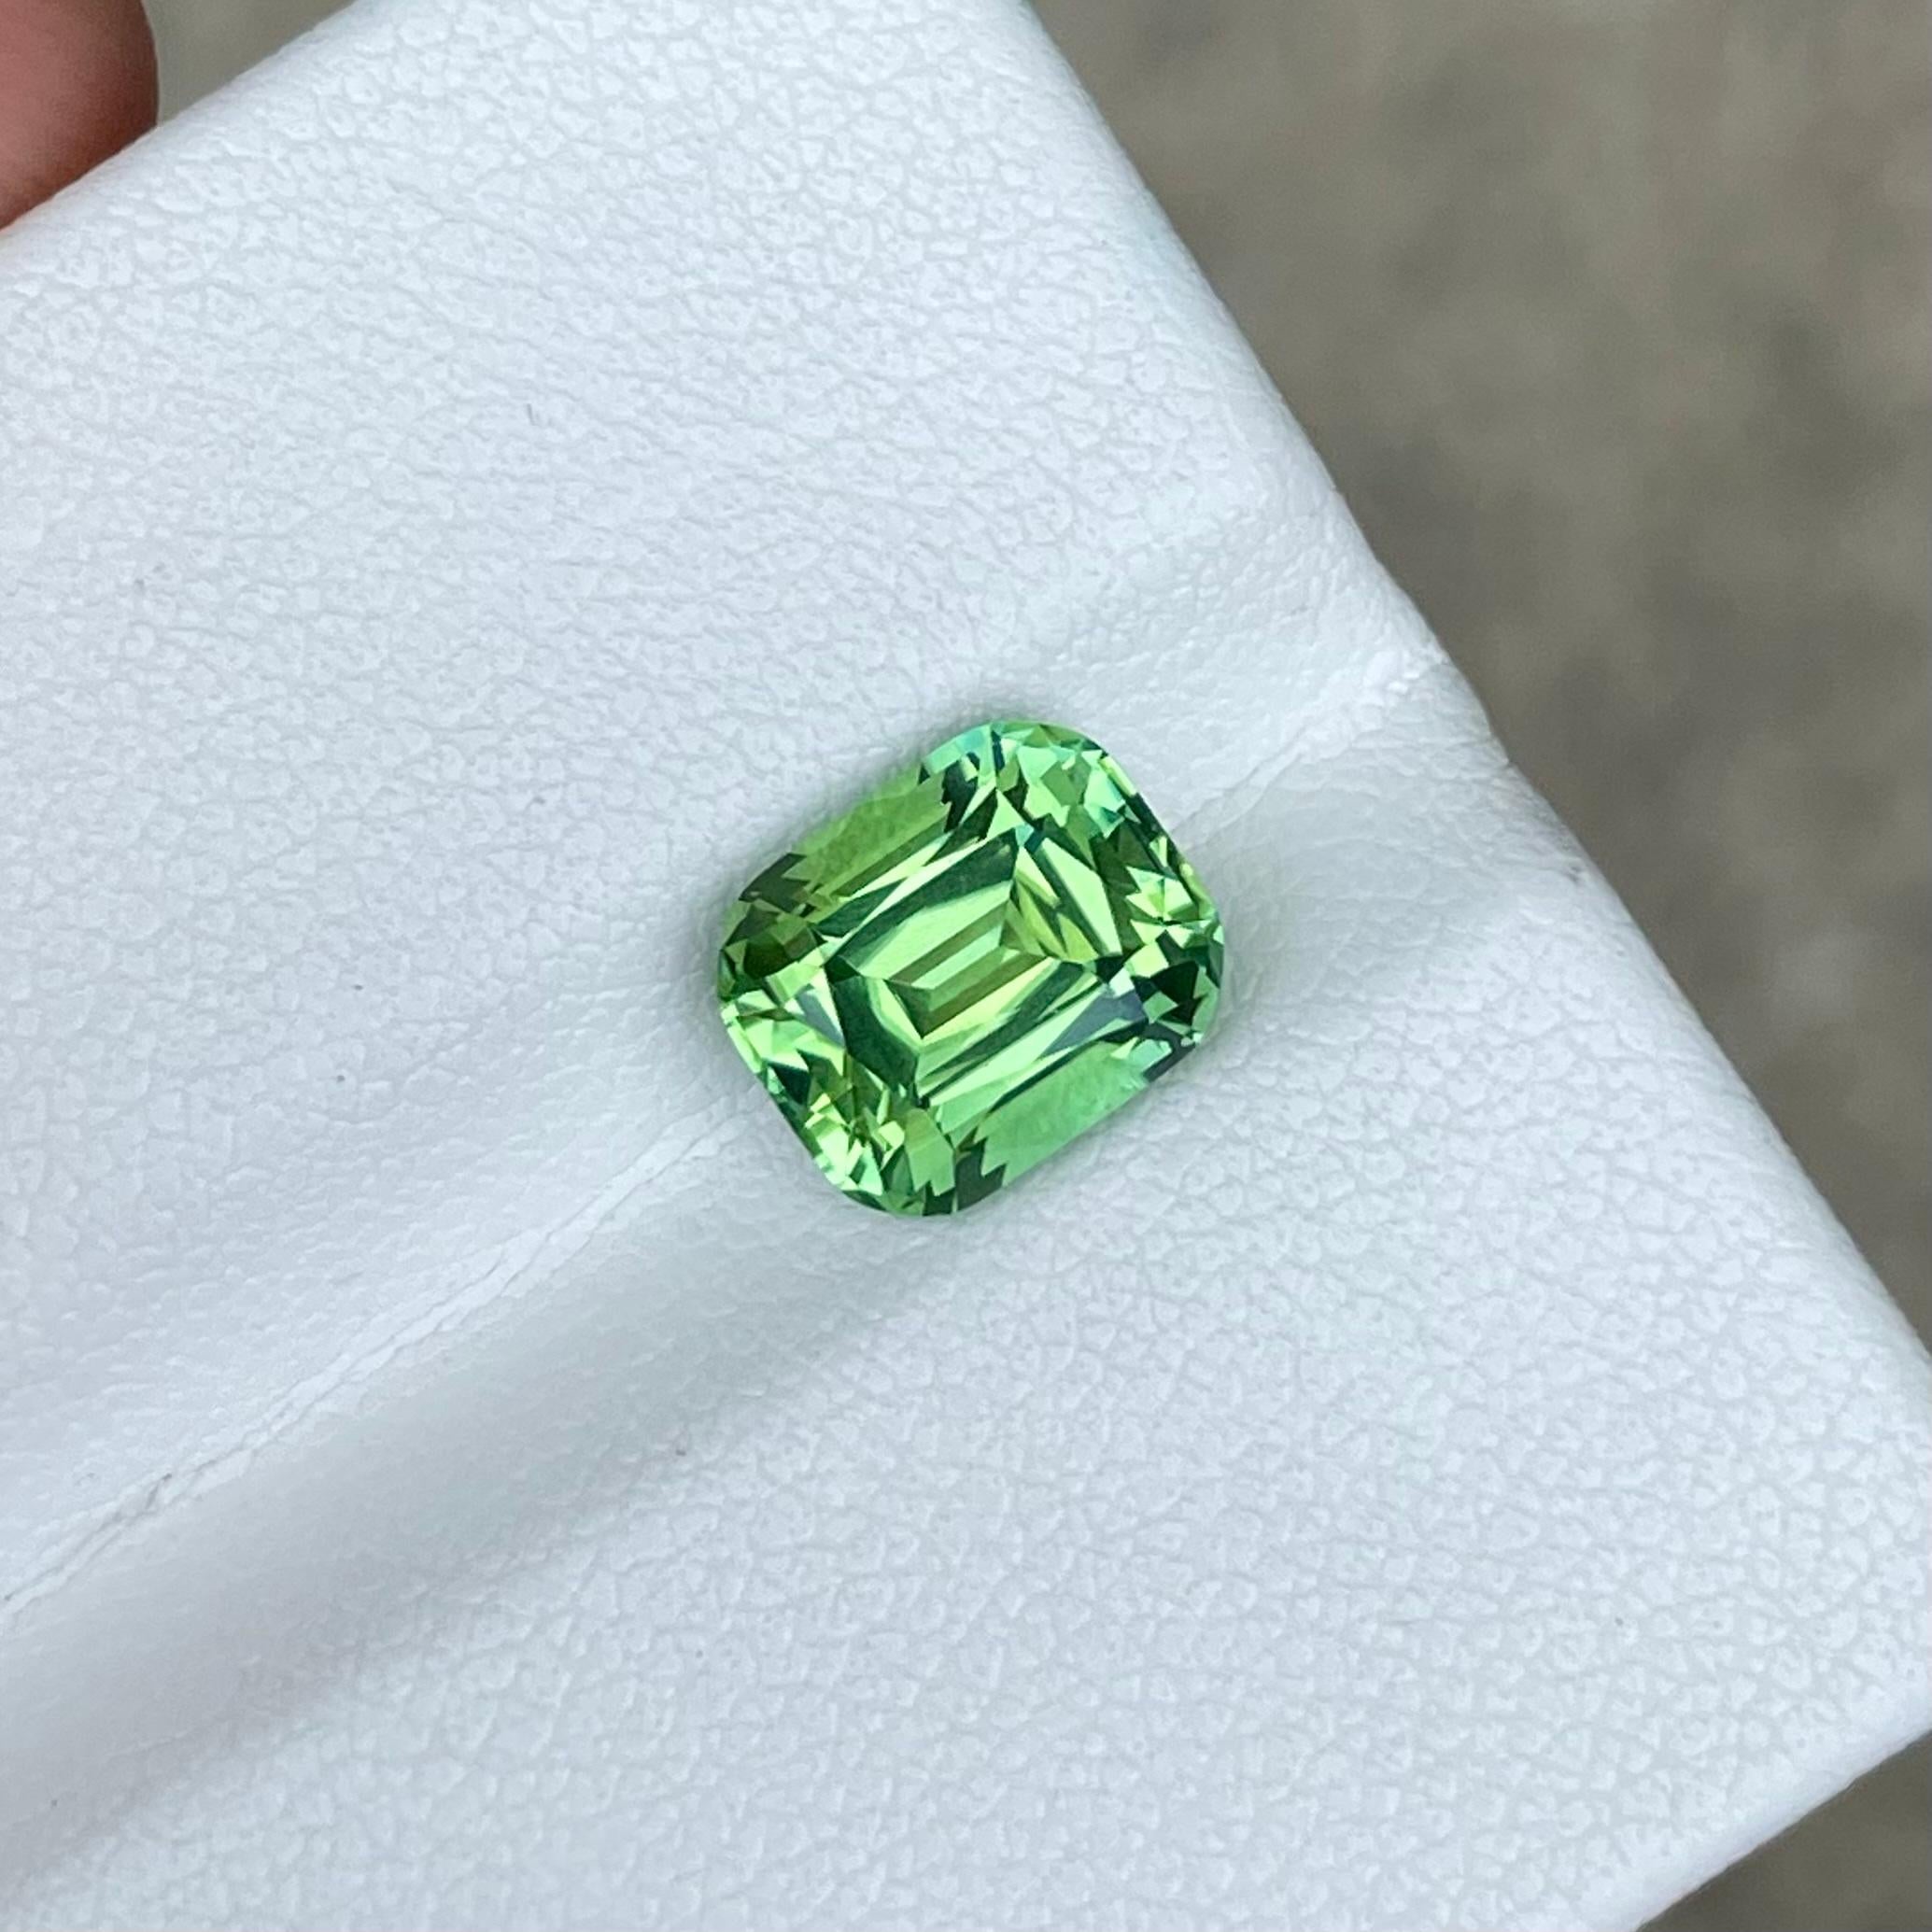 Weight : 2.60 carats 
Dimensions : 8.5x7.1x5.7 mm
Clarity : Eye Clean
Treatment : None
Origin : Afghanistan
Cut : Step Cushion
Shape : Cushion




Introducing the Mint Green Tourmaline, a radiant gemstone weighing 2.60 carats and expertly cut into a